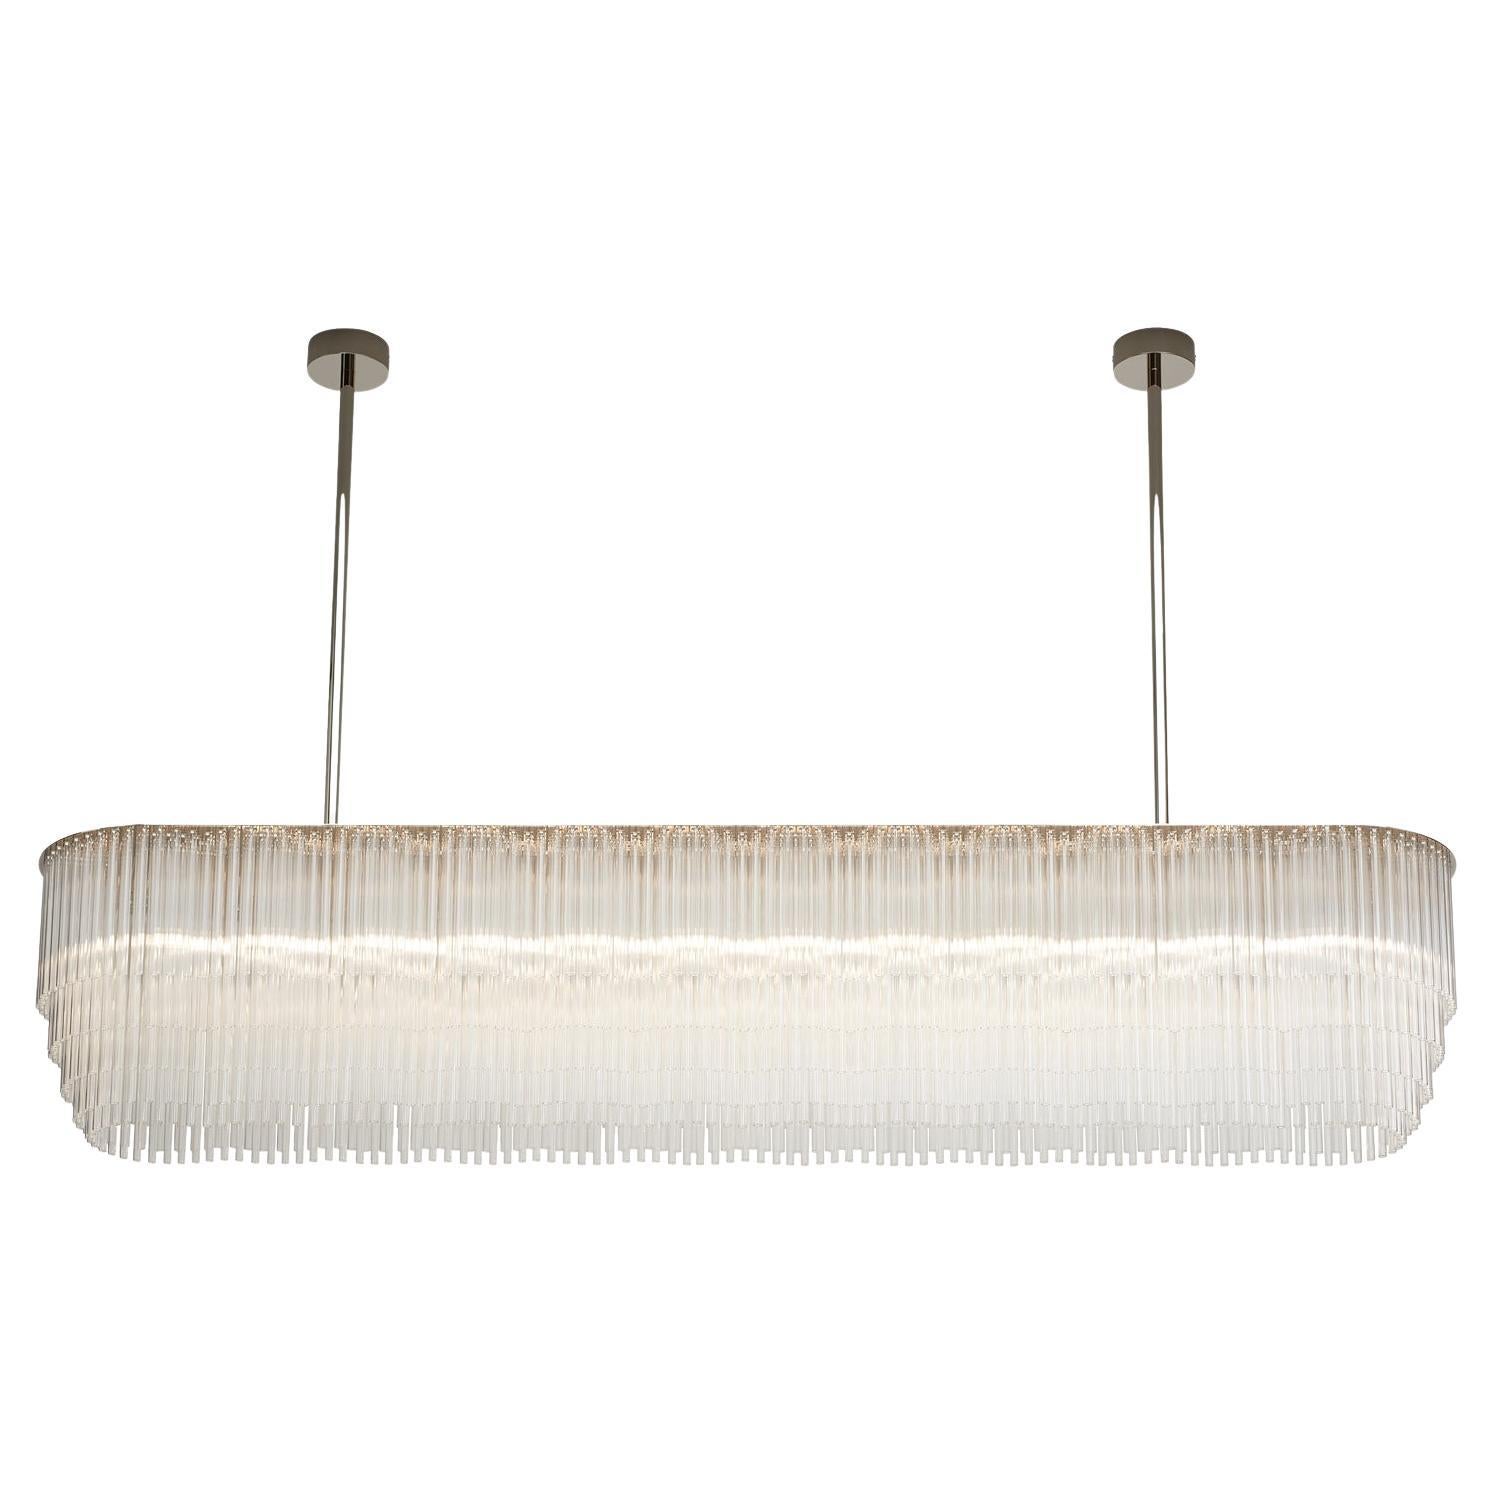 Linear Chandelier 1588mm / 62.5" in Polished Nickel with Tiered Glass Profile